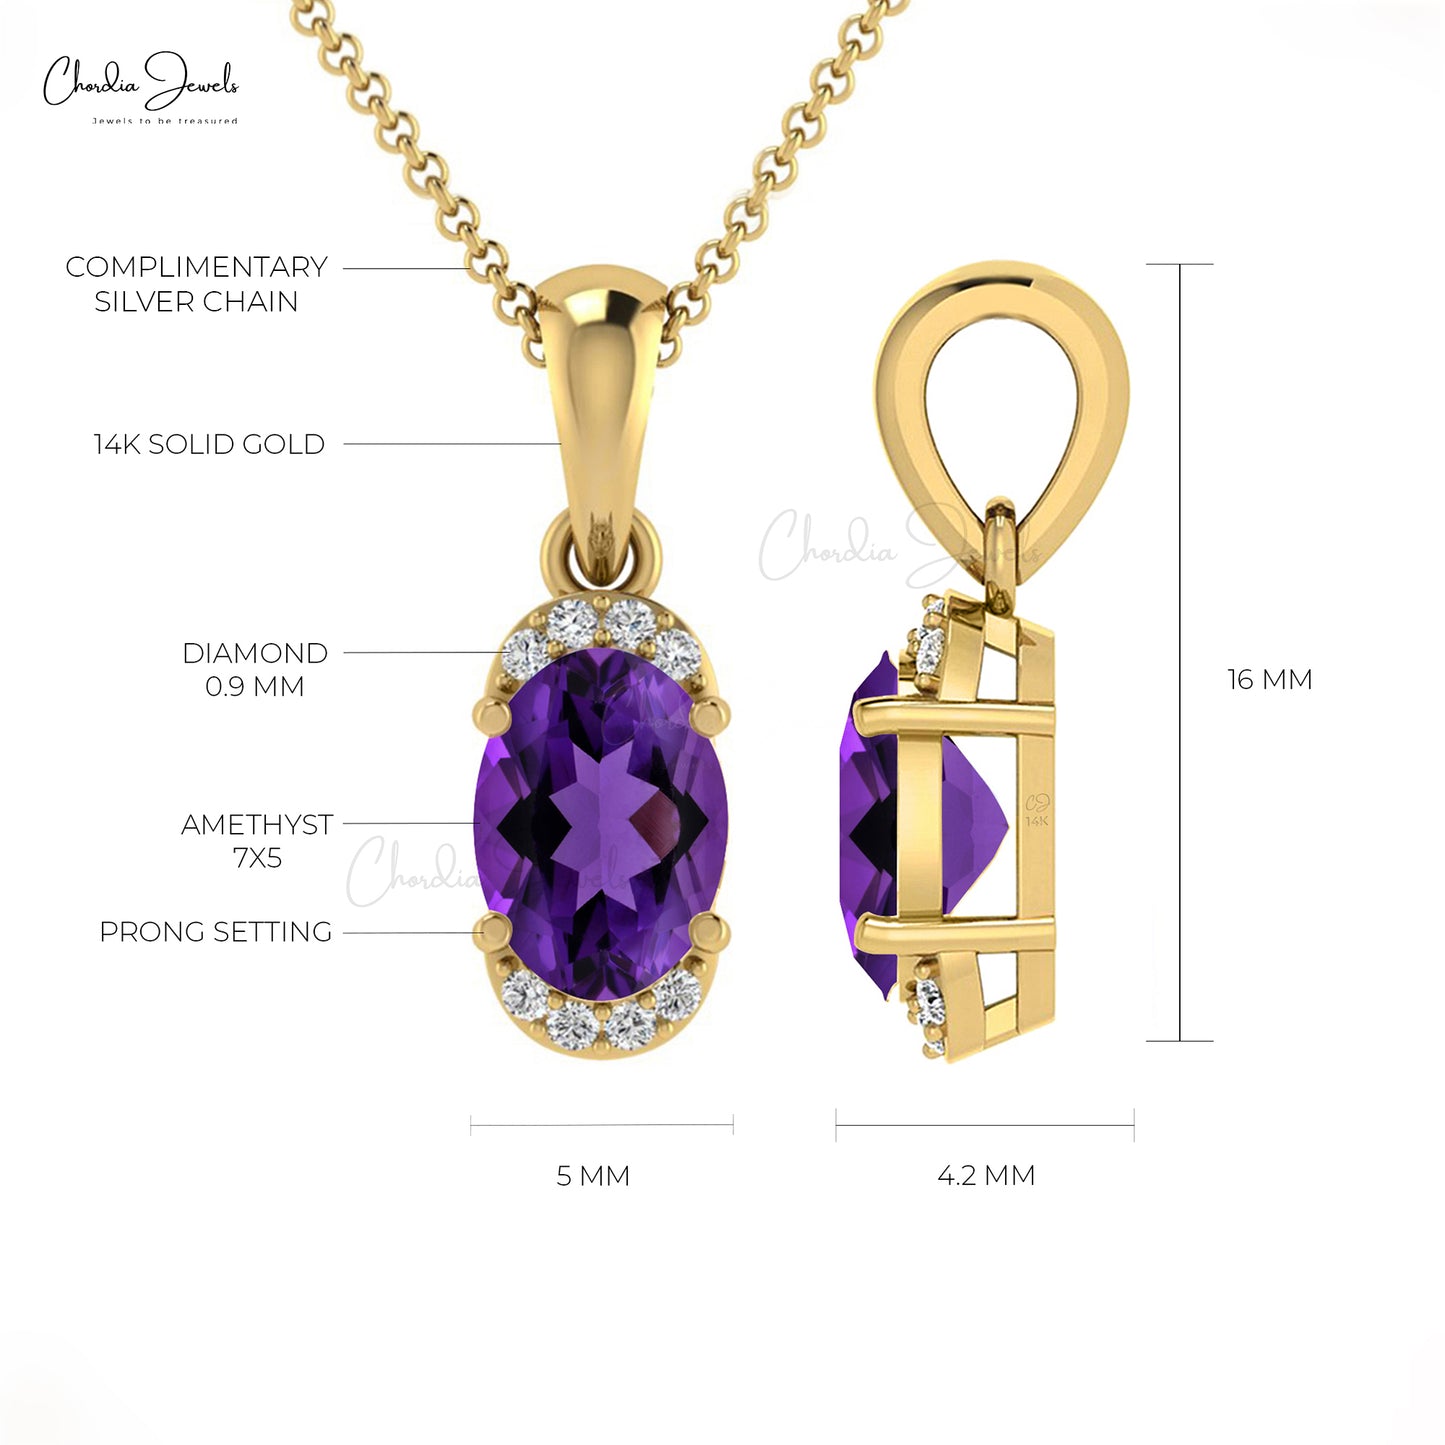 14k Solid Gold Diamond, Natural Amethyst Half Halo Pendant, 7x5mm Oval Cut February Birthstone Pendant Gift for Her